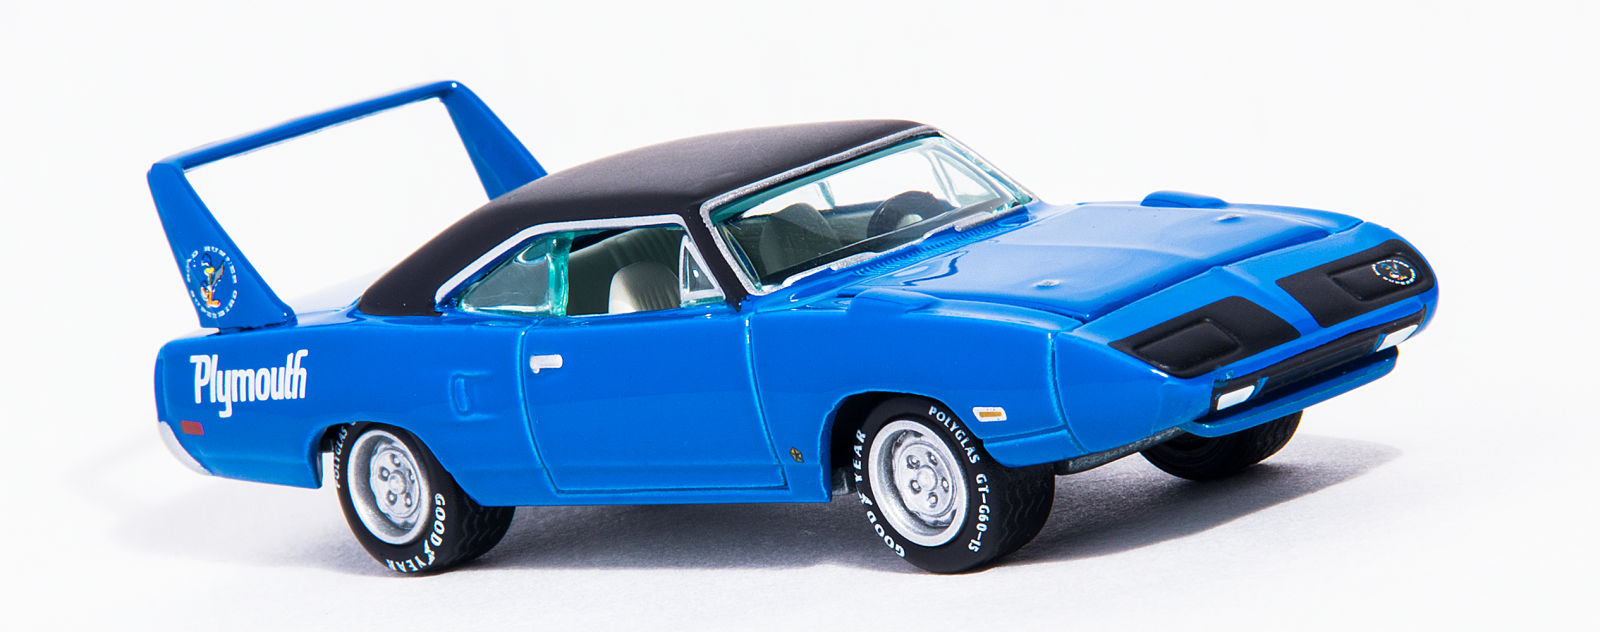 Illustration for article titled Johnny Lightning - Plymouth Superbird [Review]